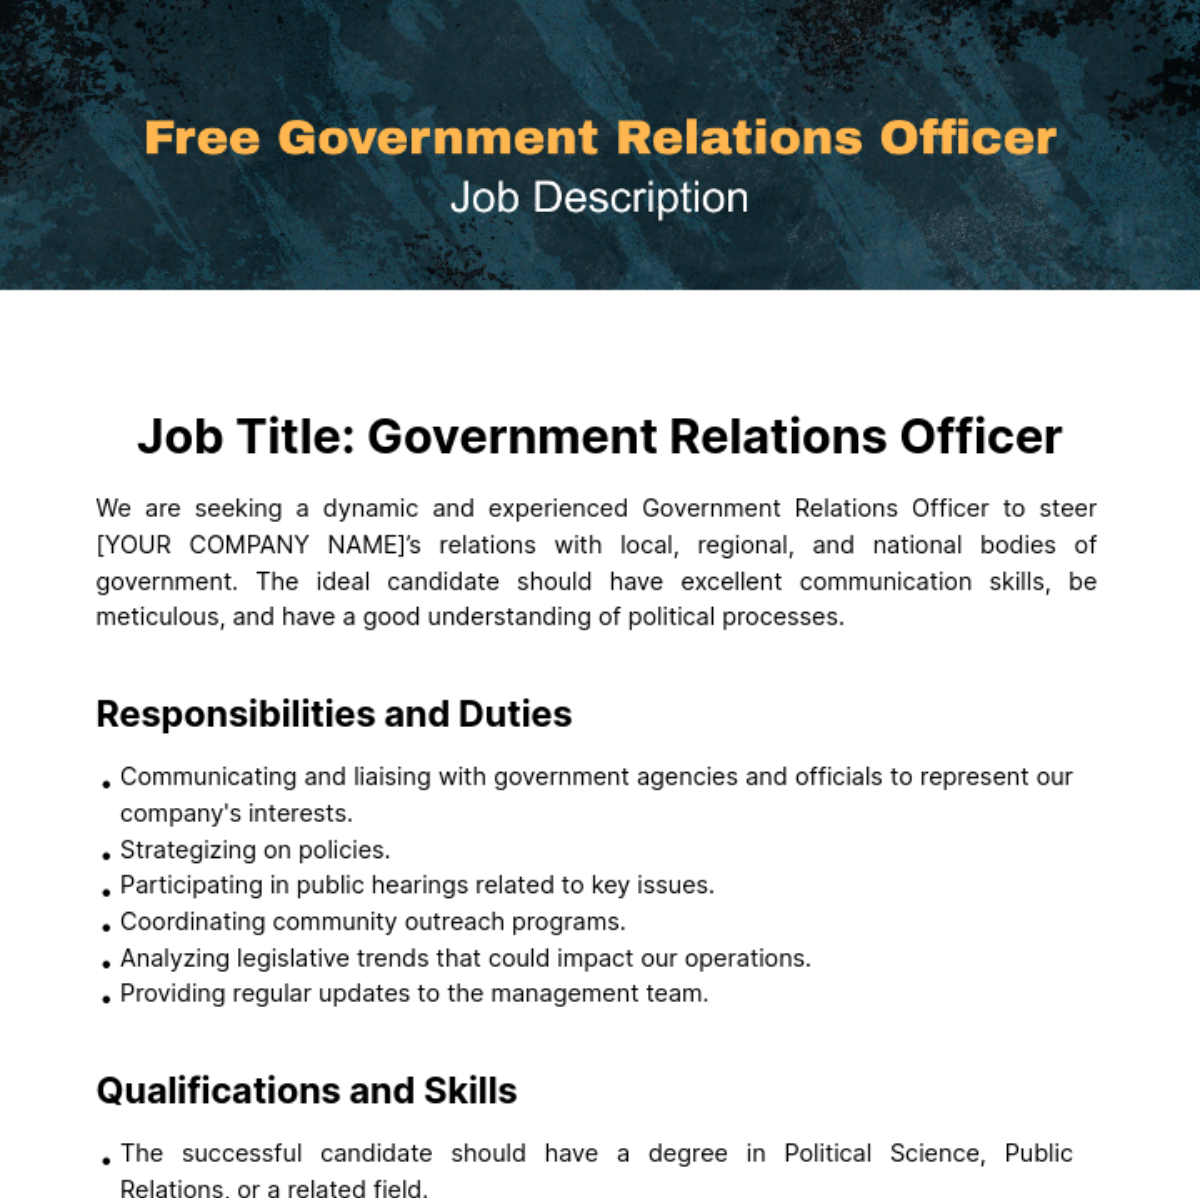 Free Government Relations Officer Job Description Template